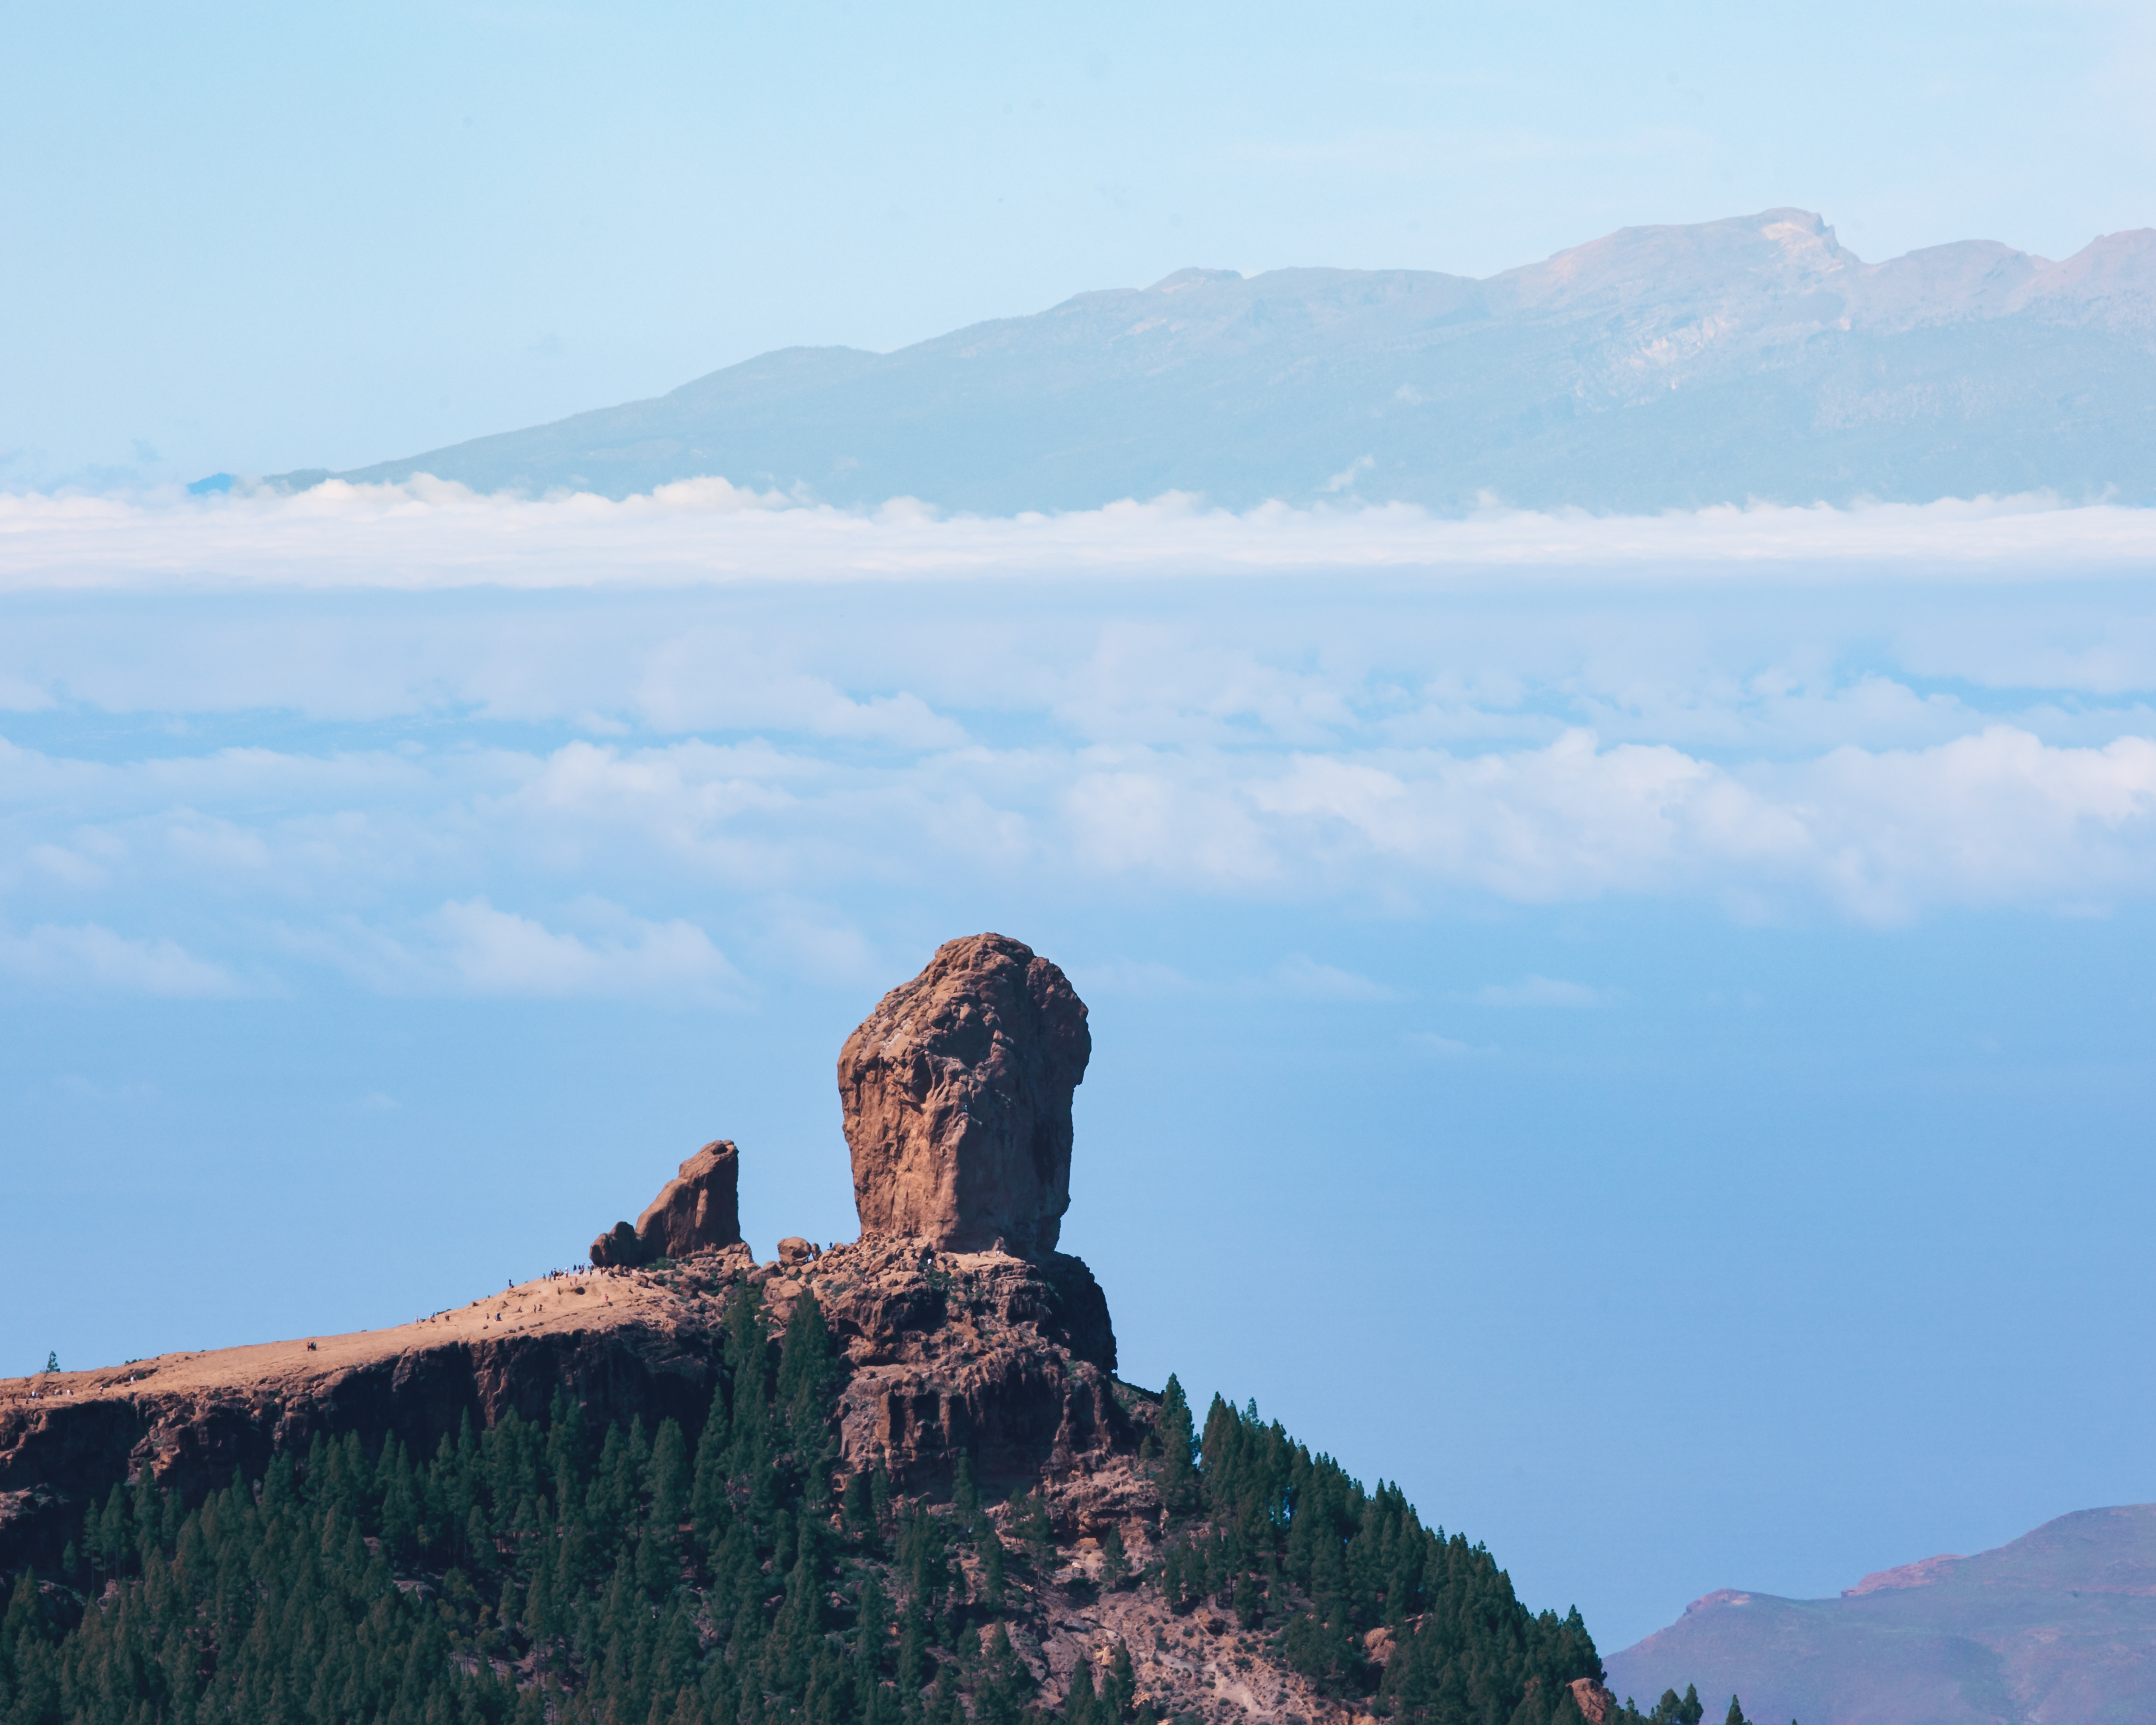 Close up of Roque Nublo, seen from Pico de las Nieves. You can se hikers next to the rock to get a estimate of the size of the rock.